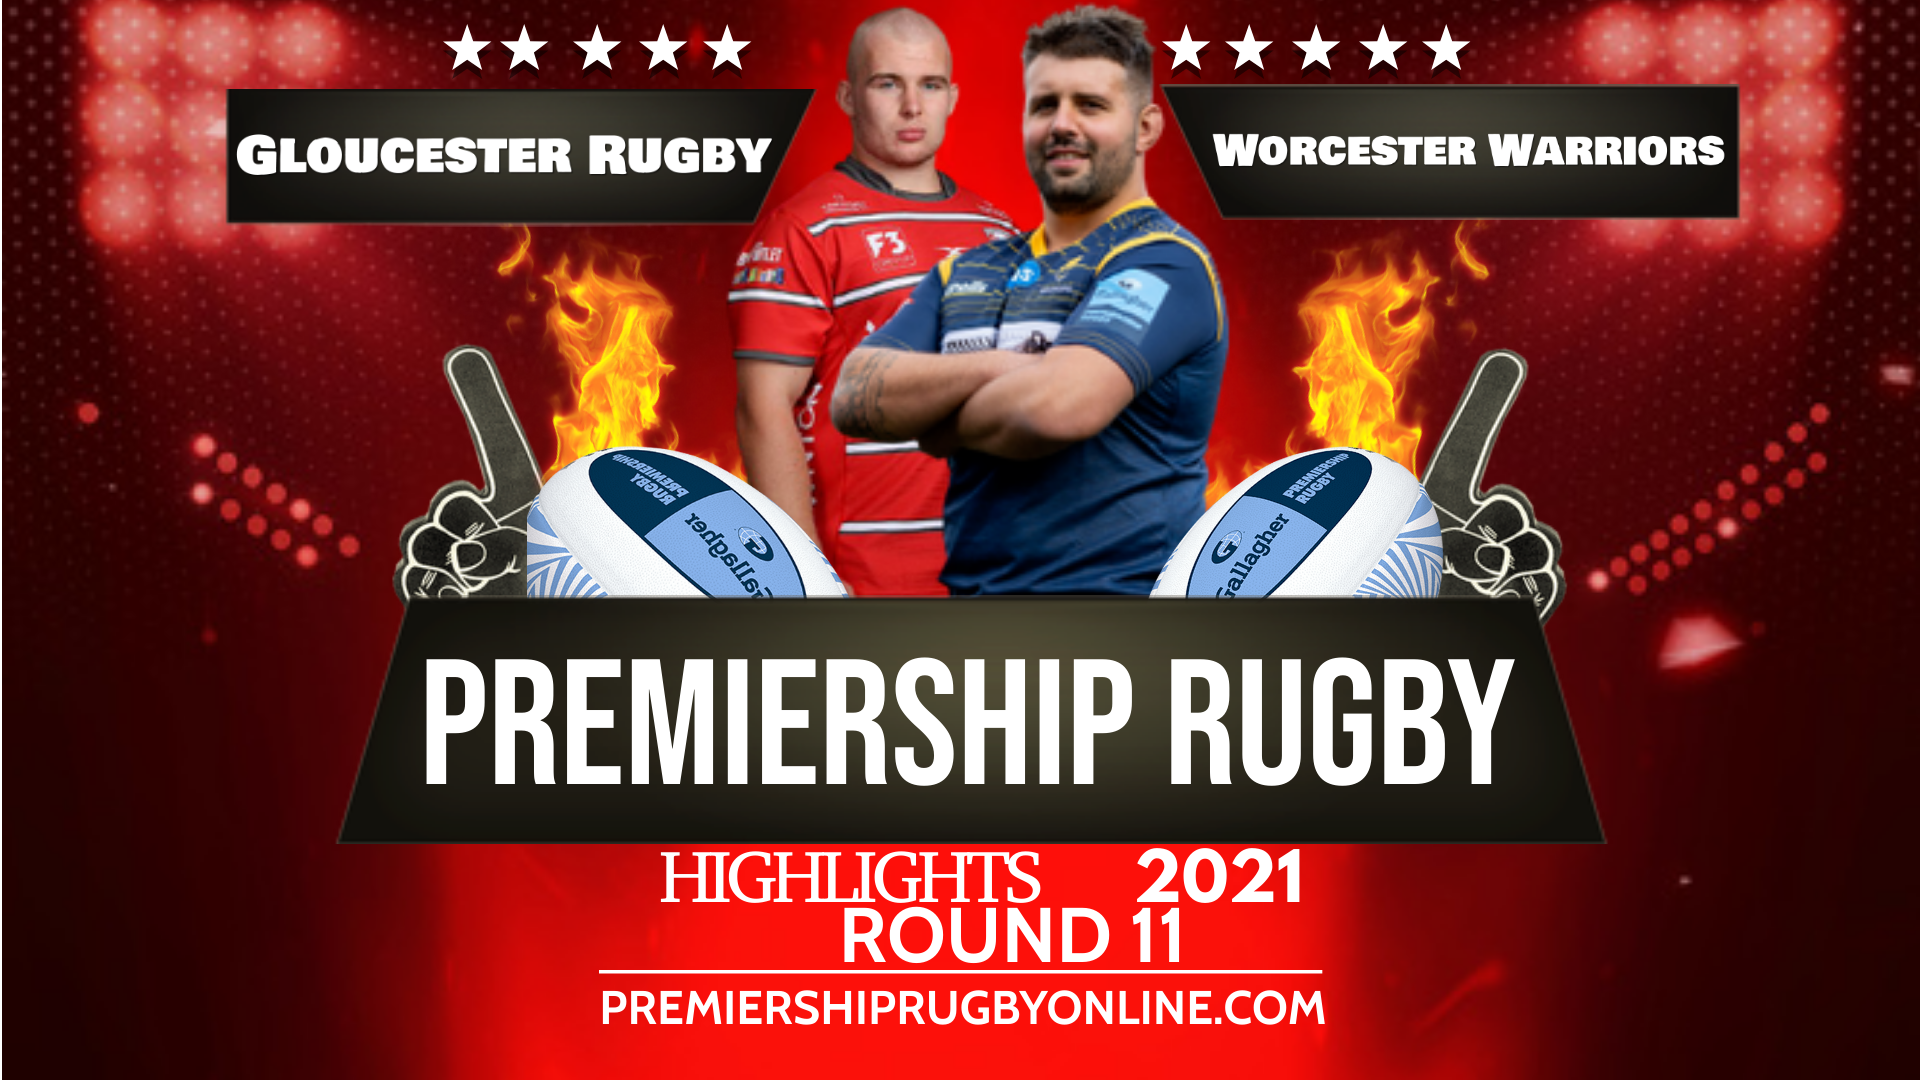 Gloucester Rugby Vs Worcester Warriors Highlights 2021 RD 11